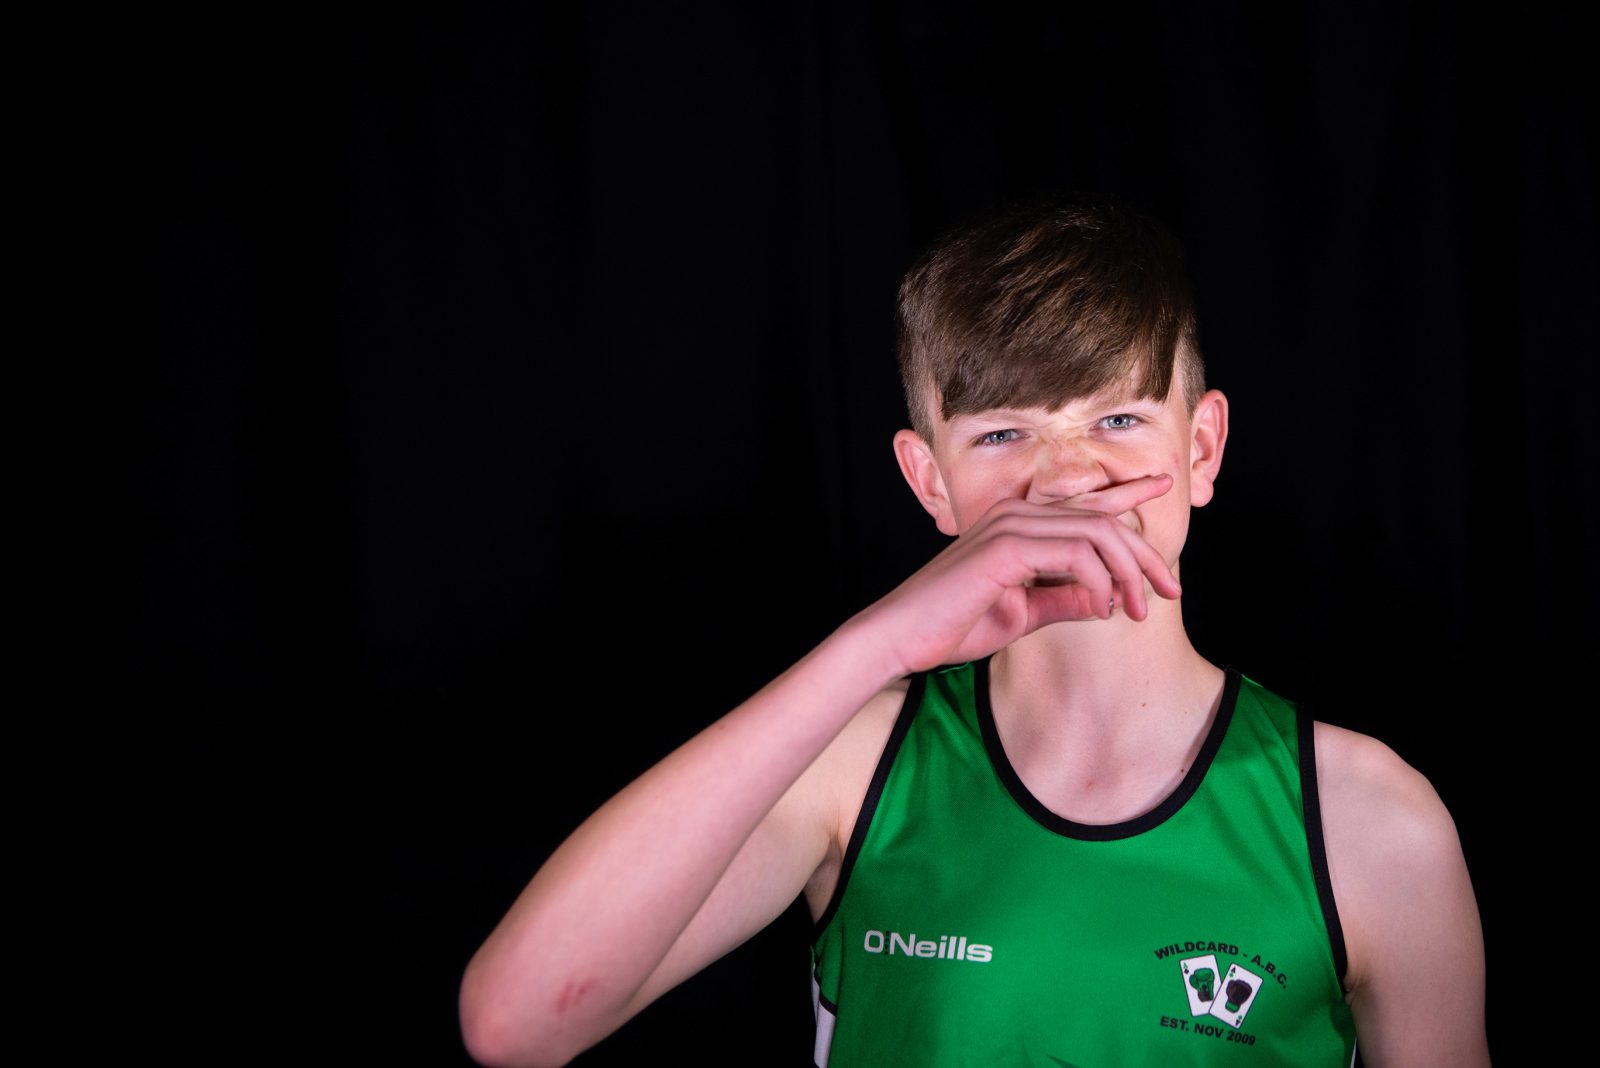 A young person with dark hair, wearing a green sports vest wipes their nose with their hand.